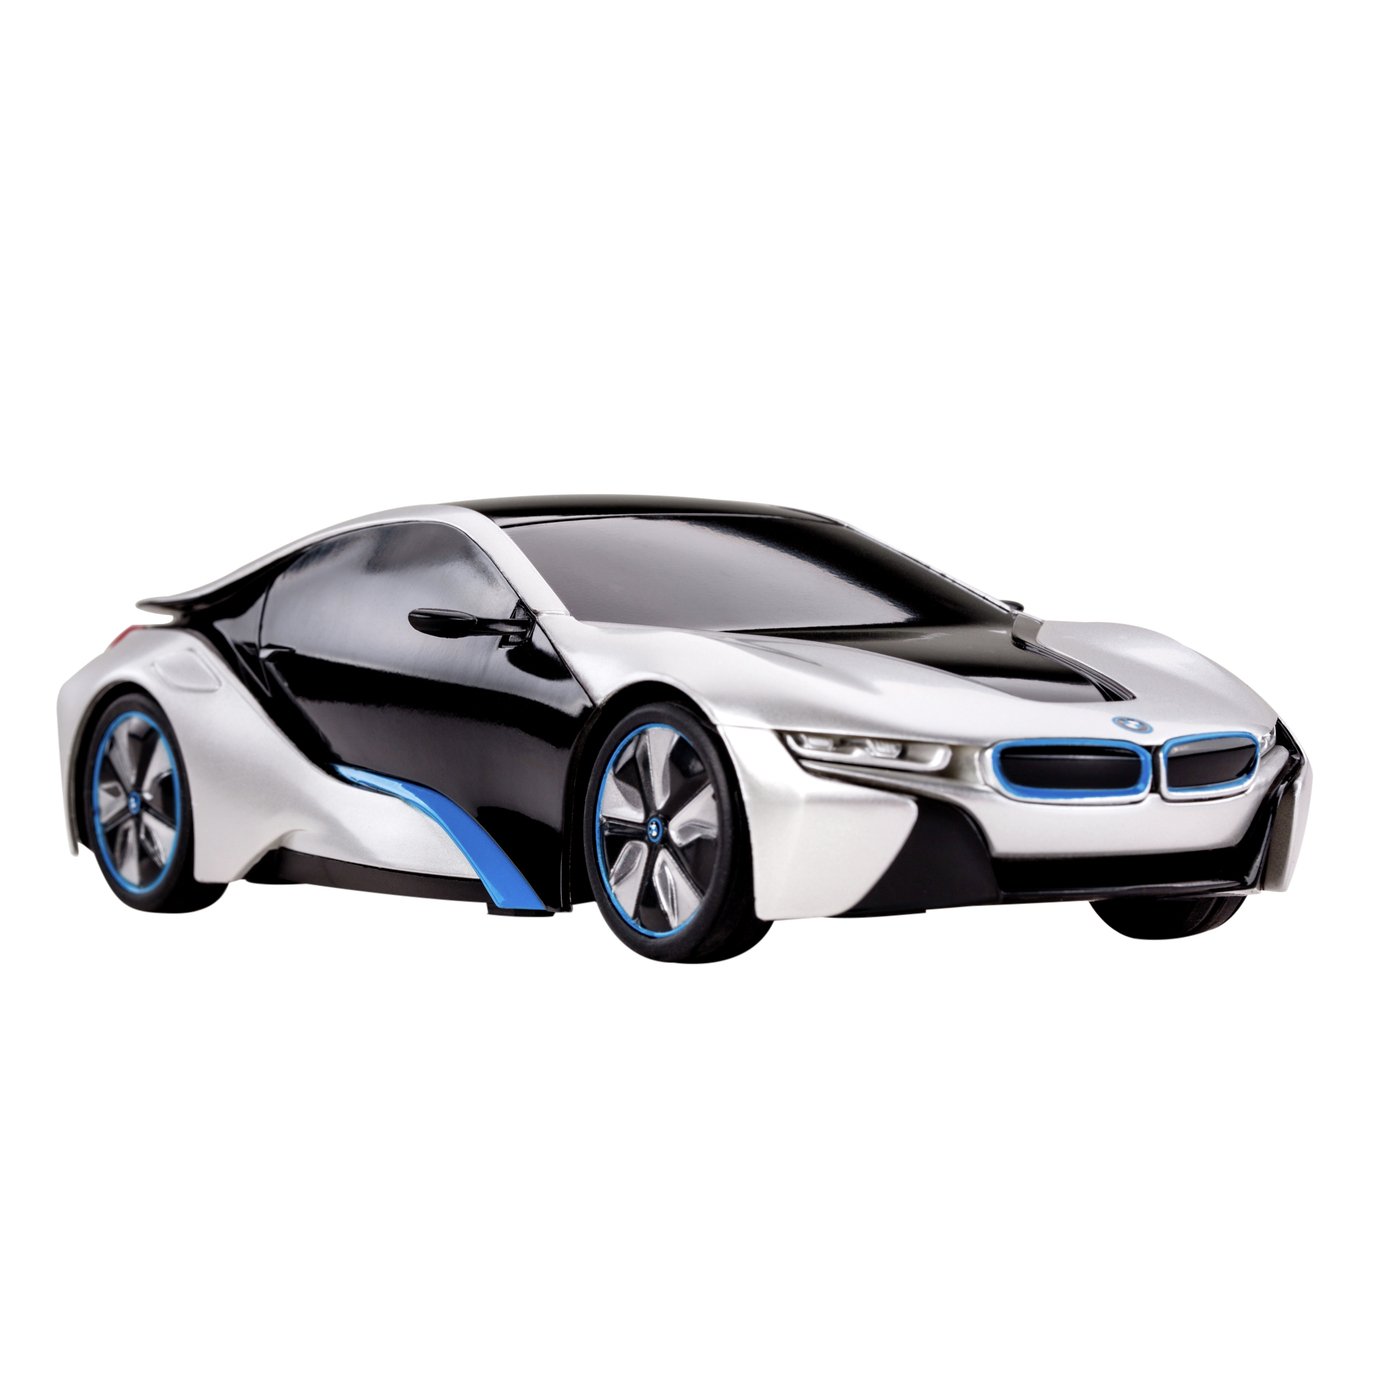 BMW i8 1:24 Radio Controlled Sports Car review